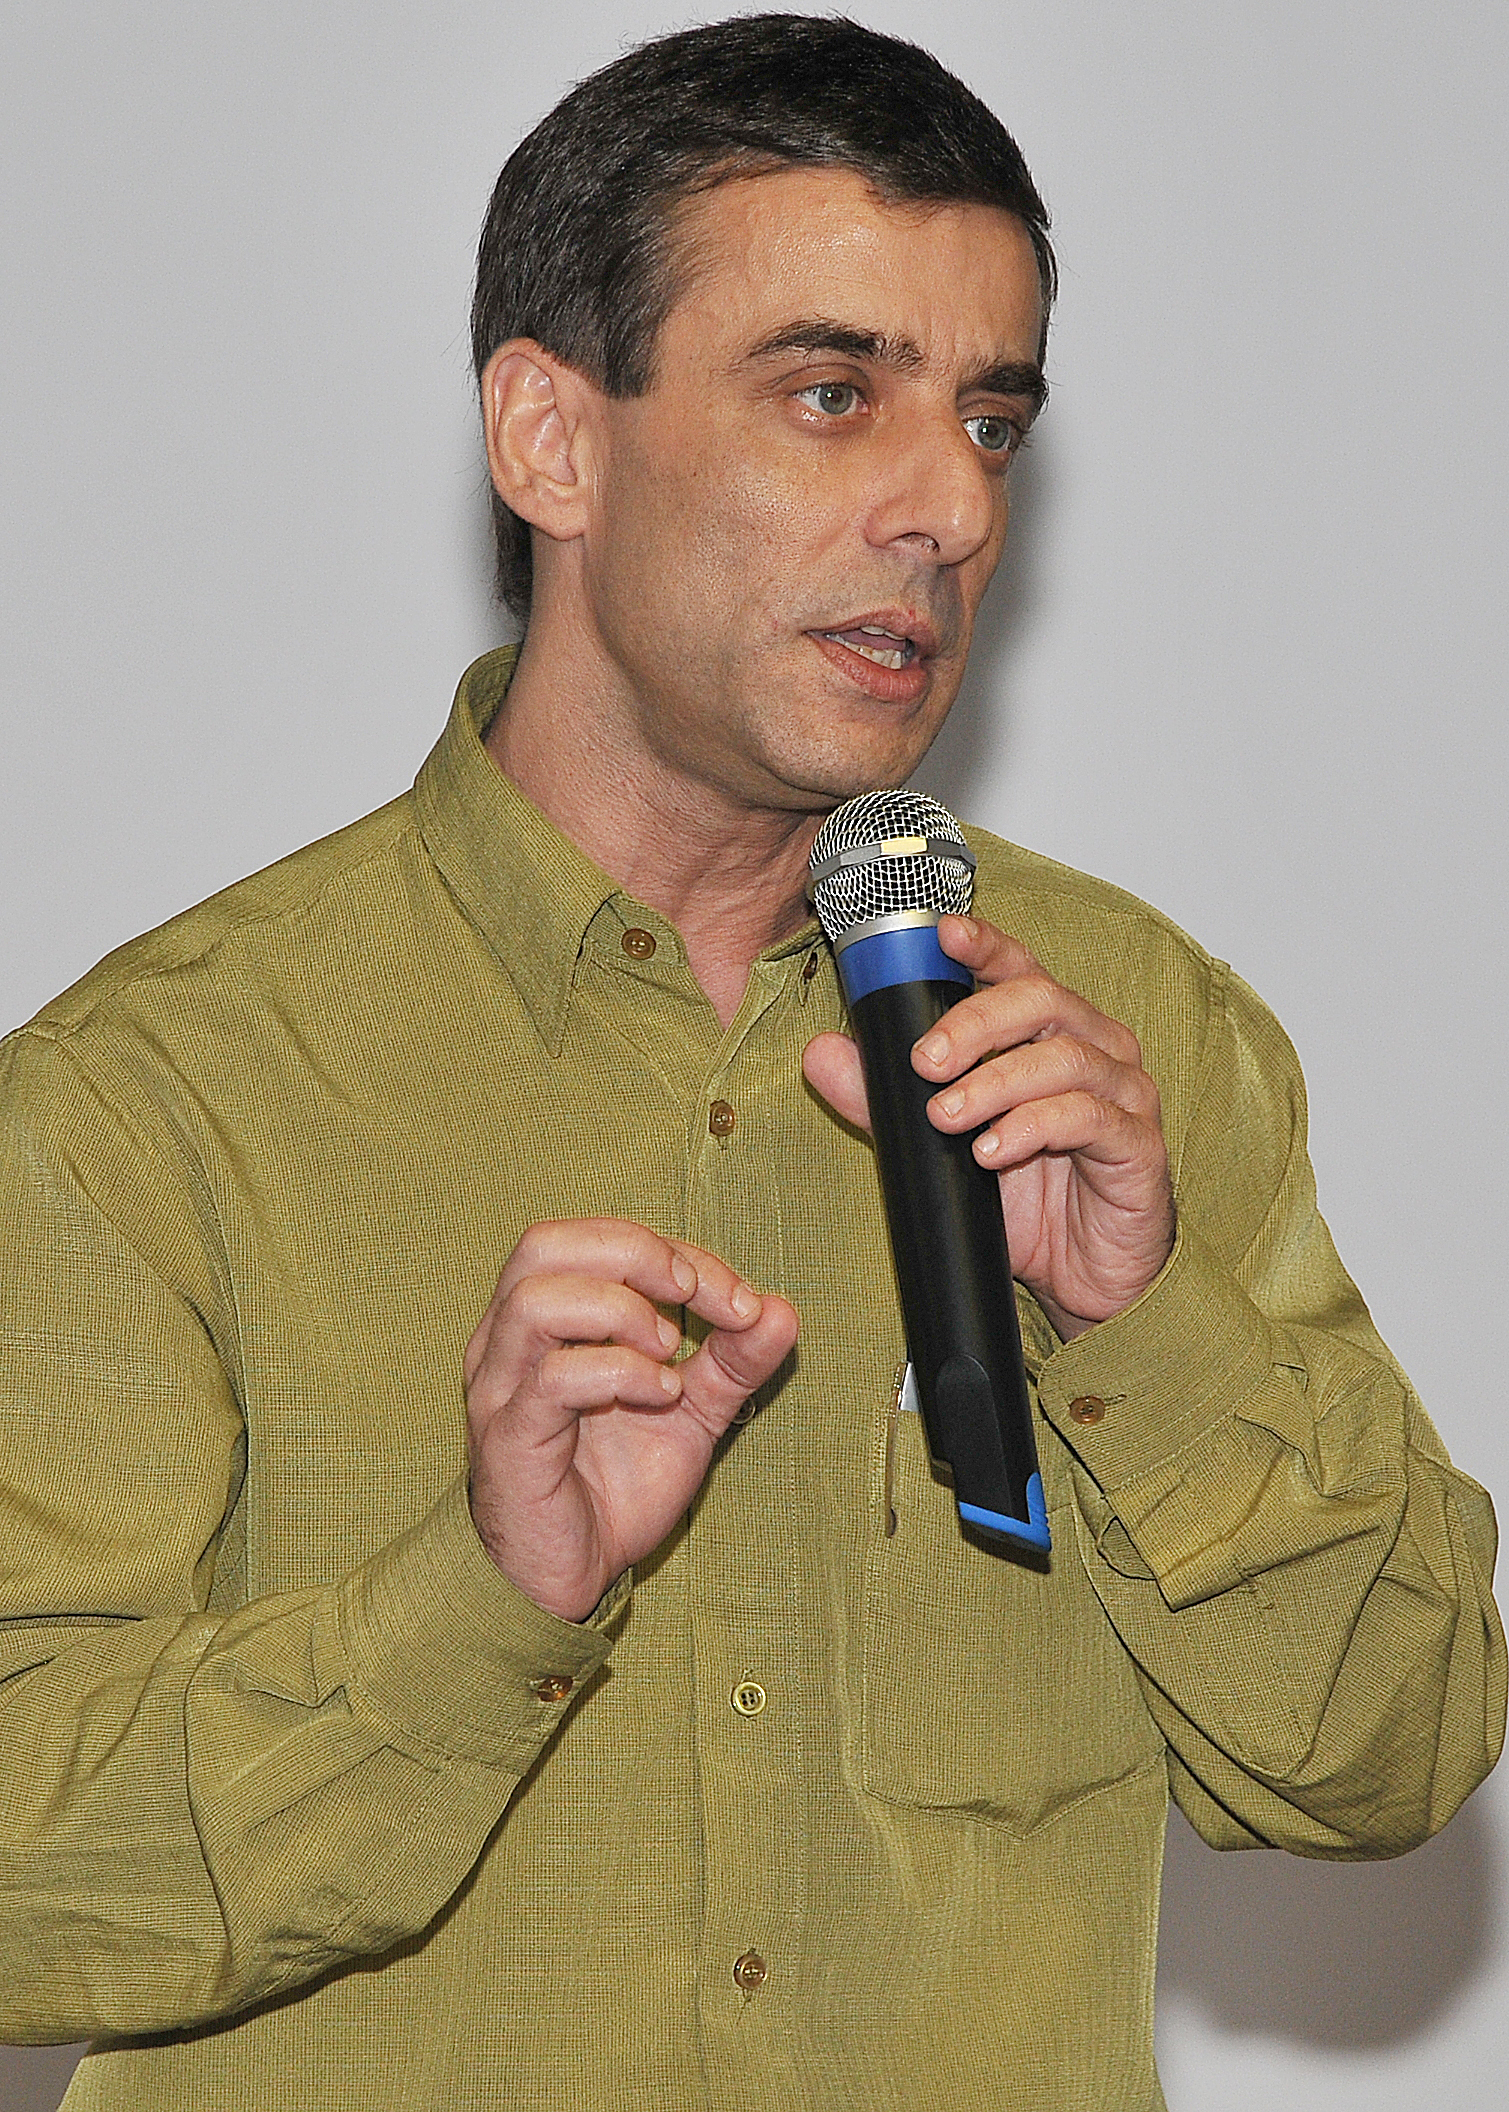 a man holding a microphone speaking to someone